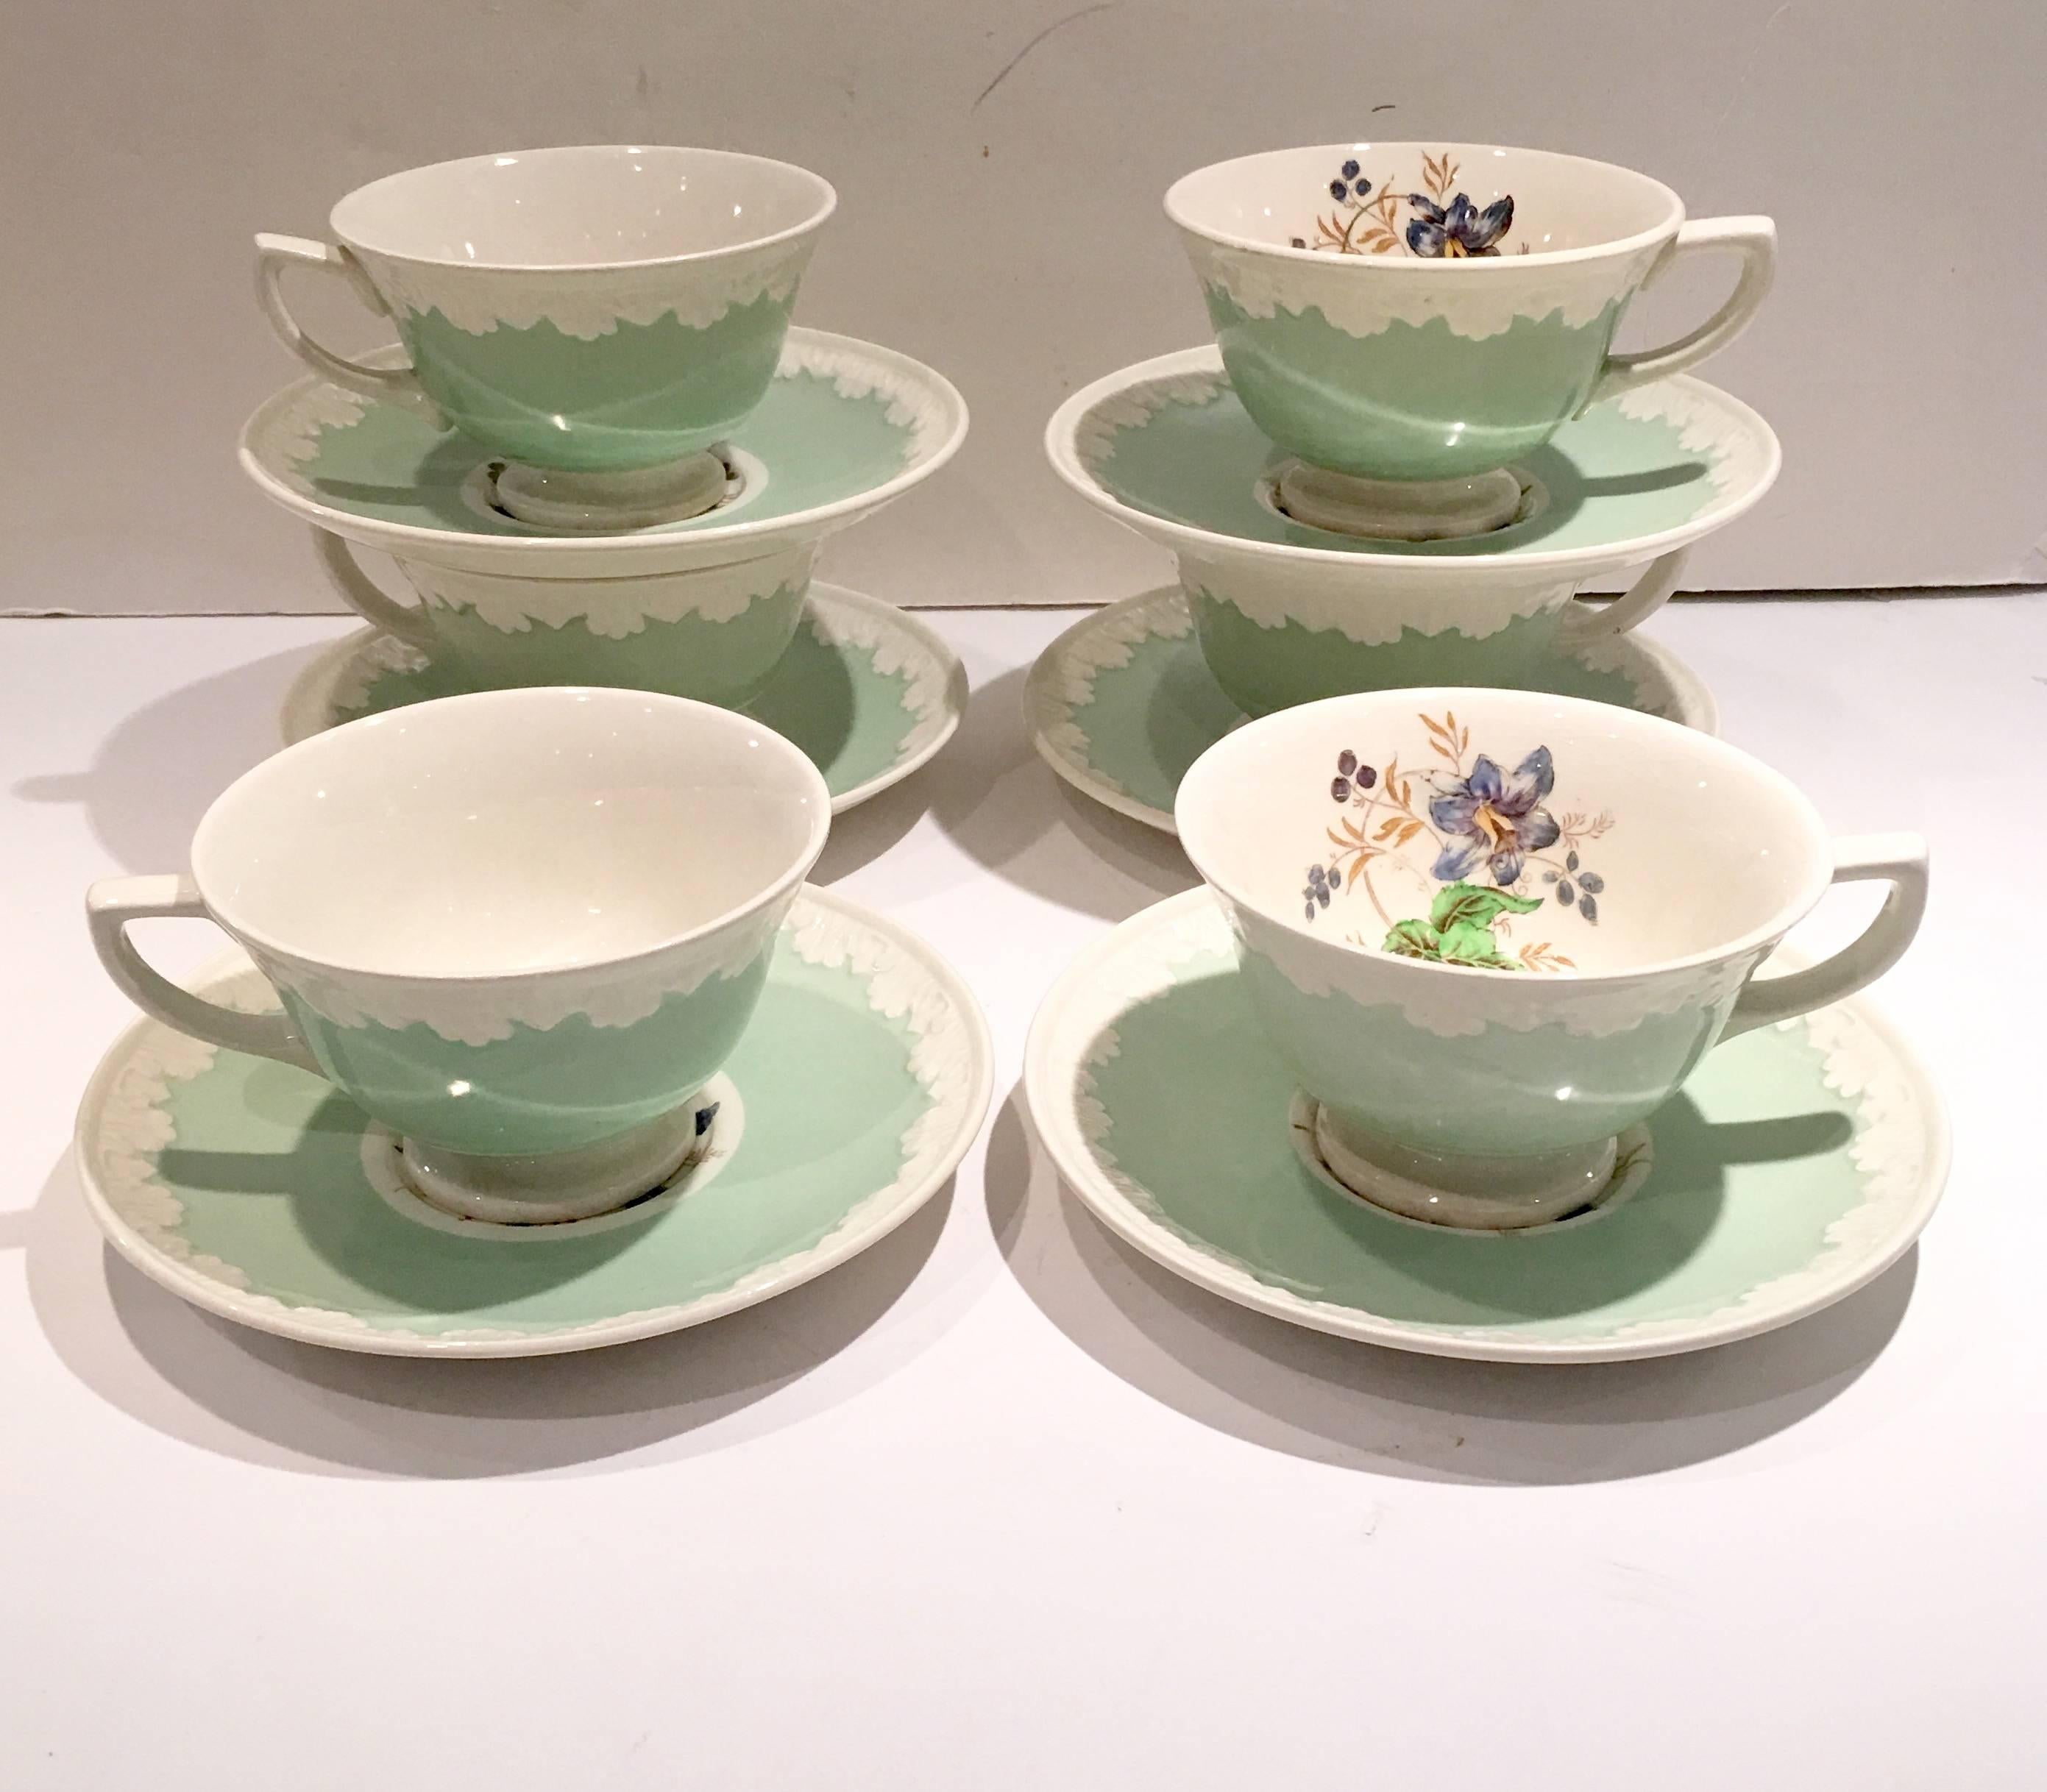 1930'S Wedgwood England, "Hampton Court Corinthian" pattern in mint, cup and saucer set. Set includes, six saucers and six tea/coffee cups. Tea cups measure, 2.5: height x 5" length x 4" diameter. Signed on underside.